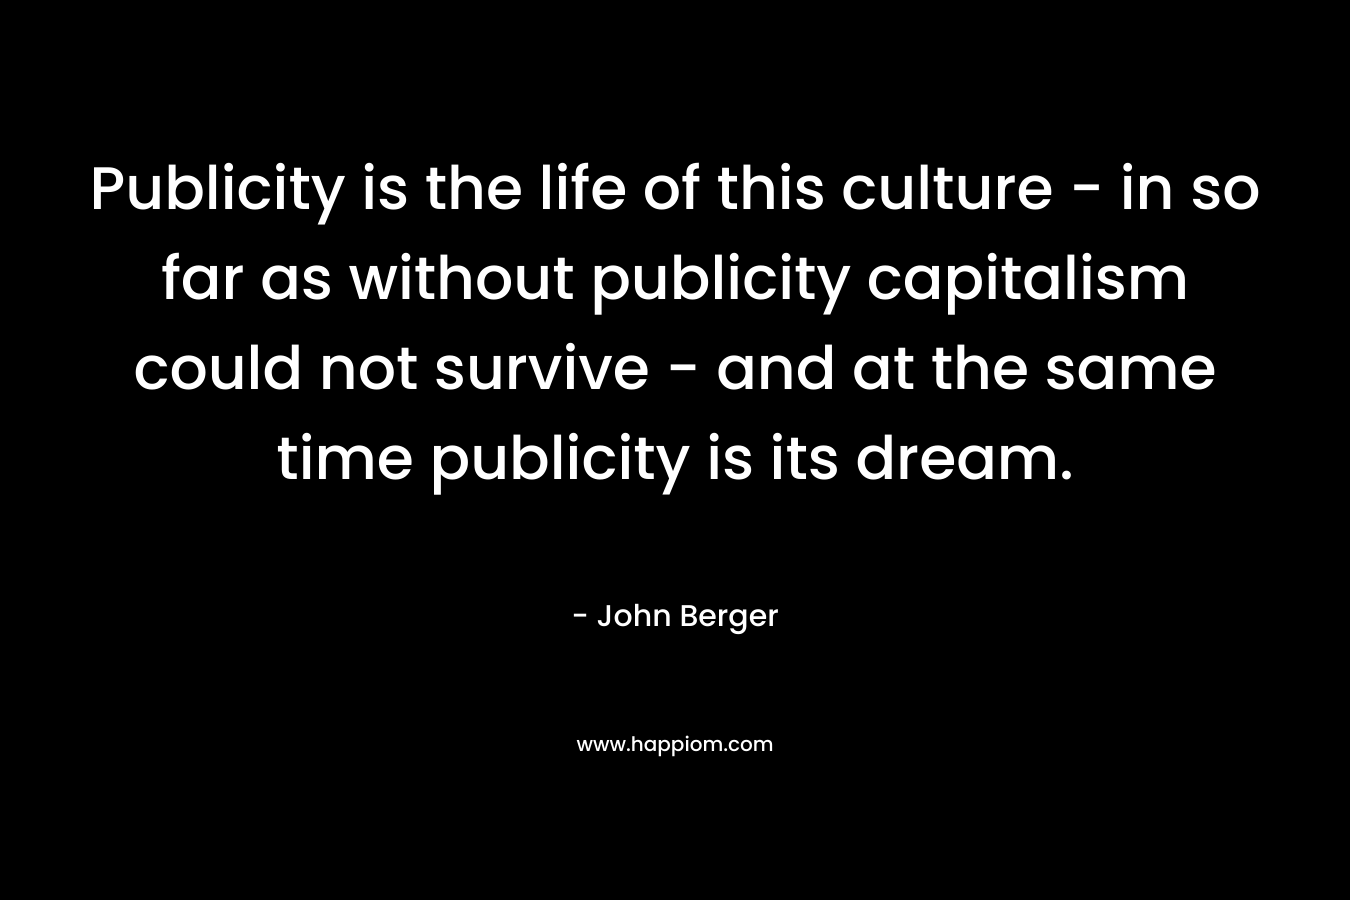 Publicity is the life of this culture – in so far as without publicity capitalism could not survive – and at the same time publicity is its dream. – John Berger